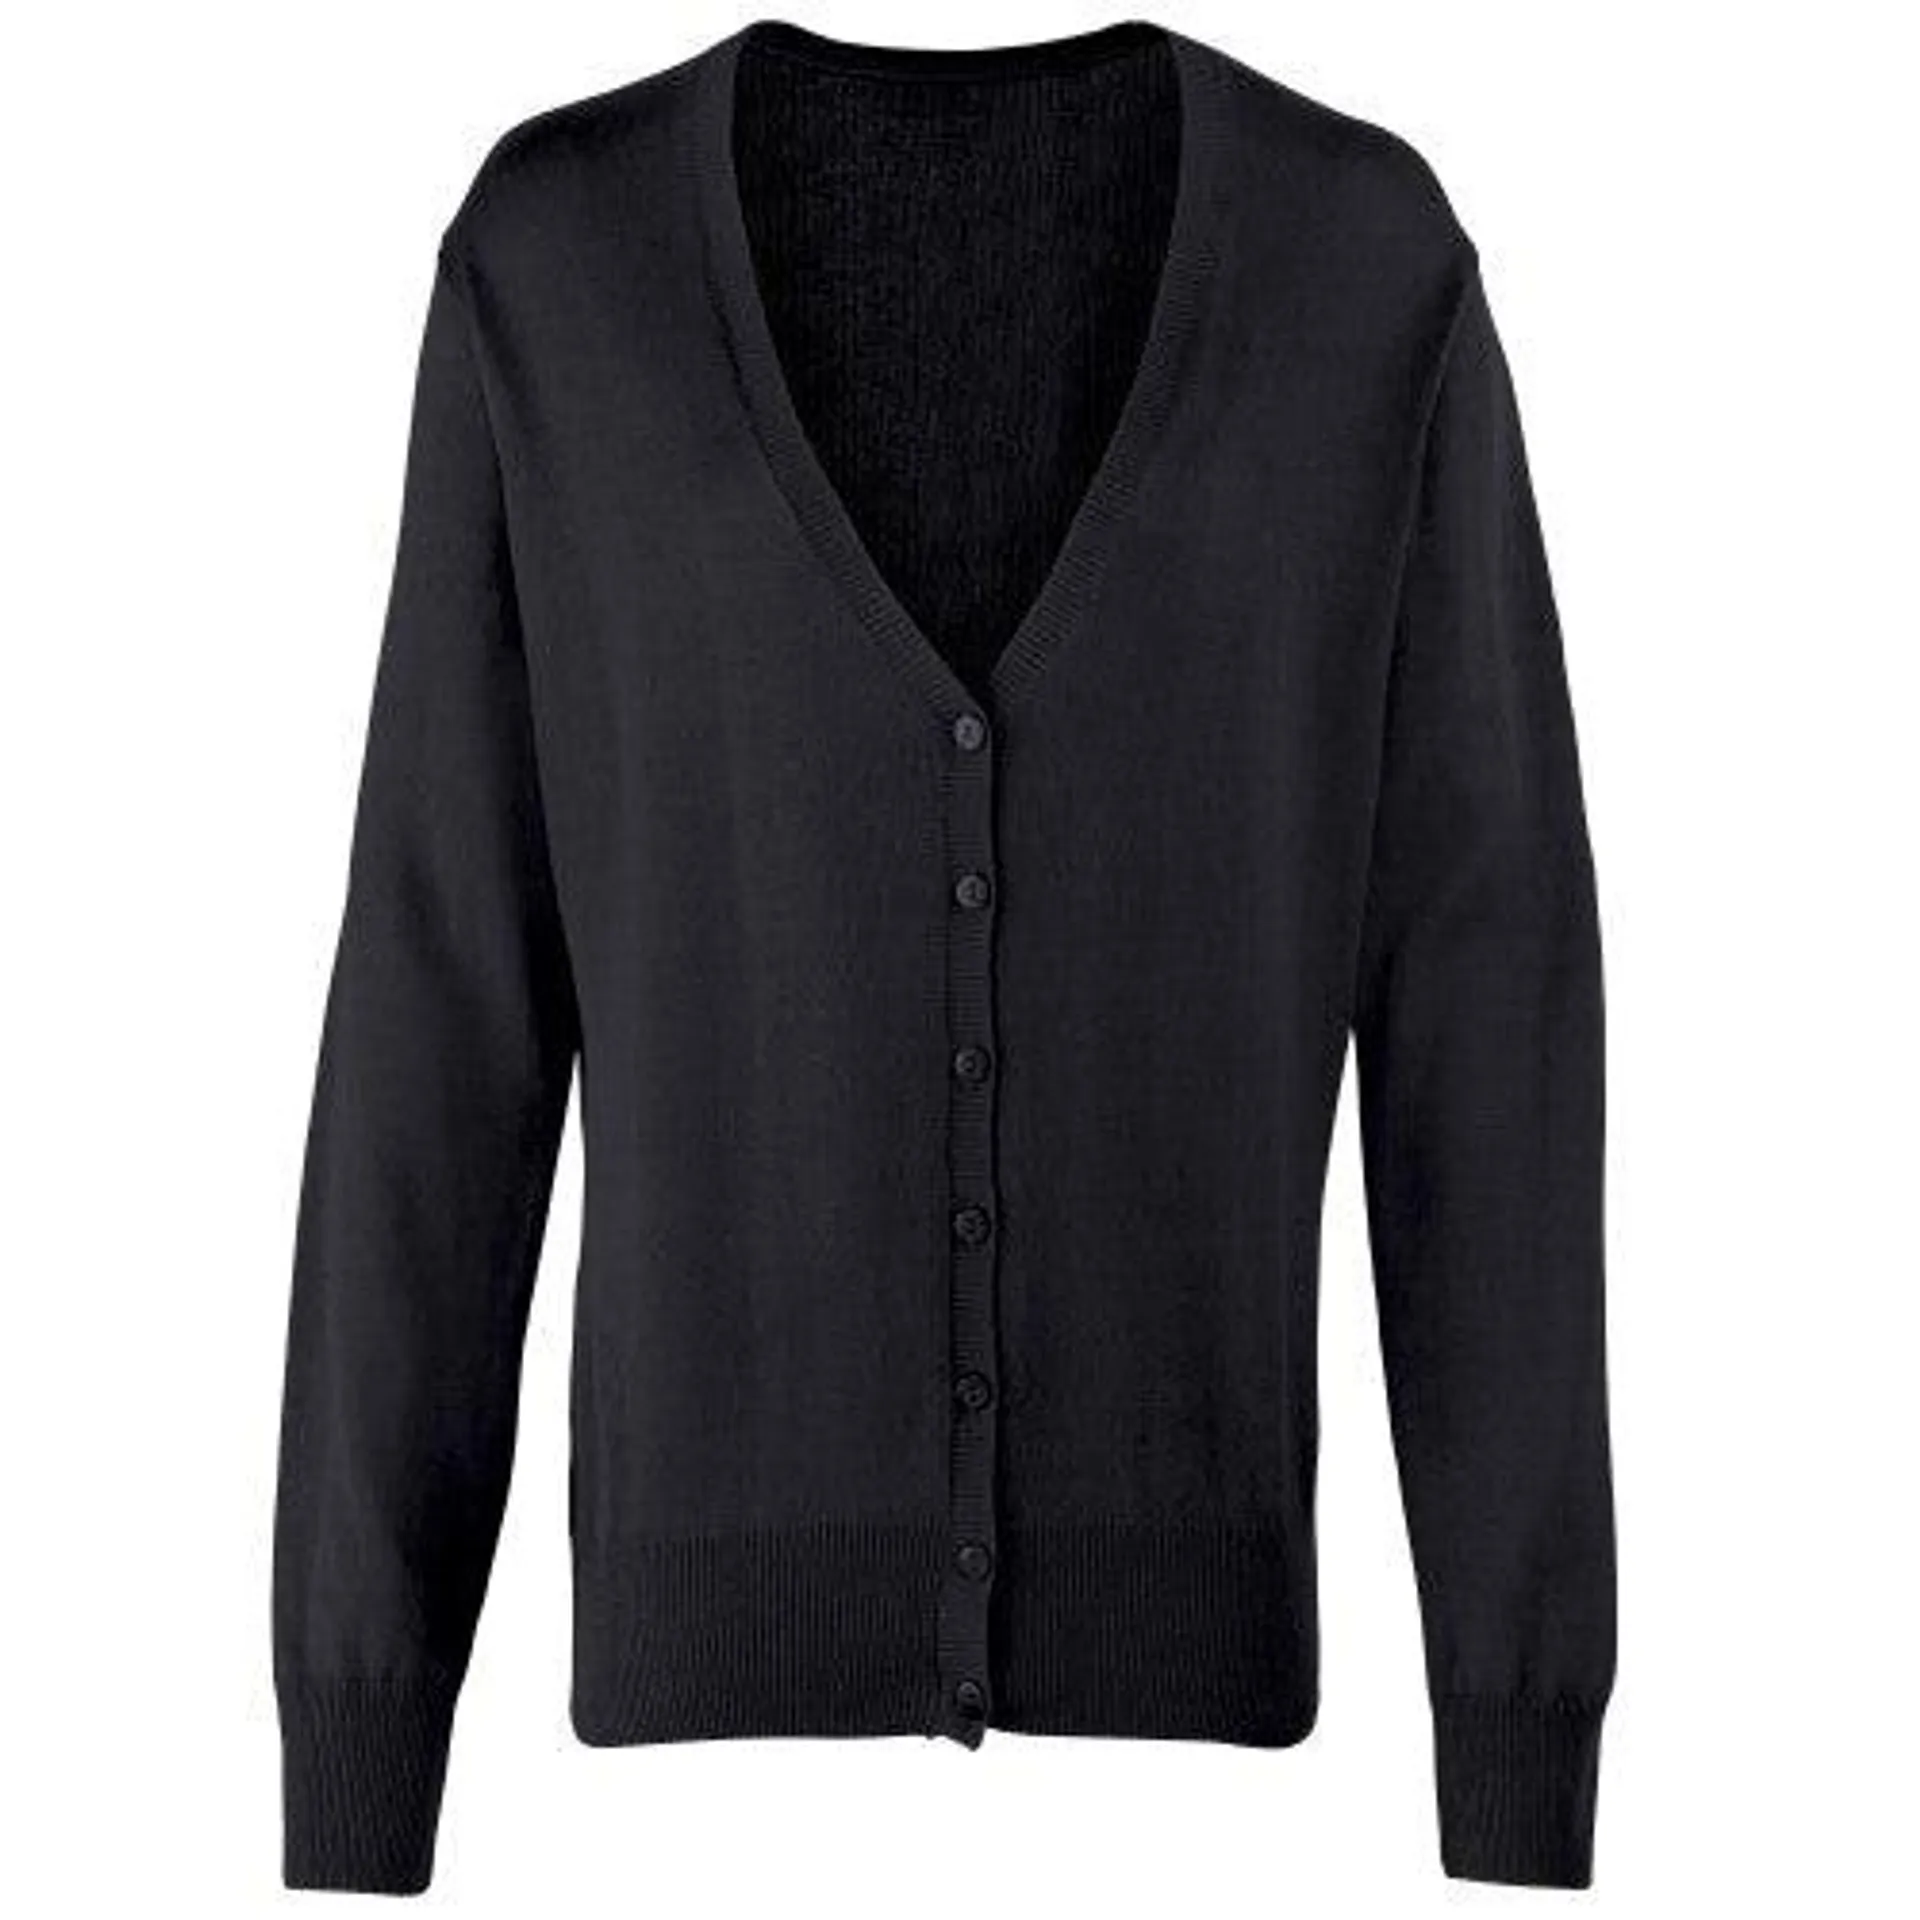 Premier Womens/Ladies Button Through Long Sleeve V-neck Knitted Cardigan